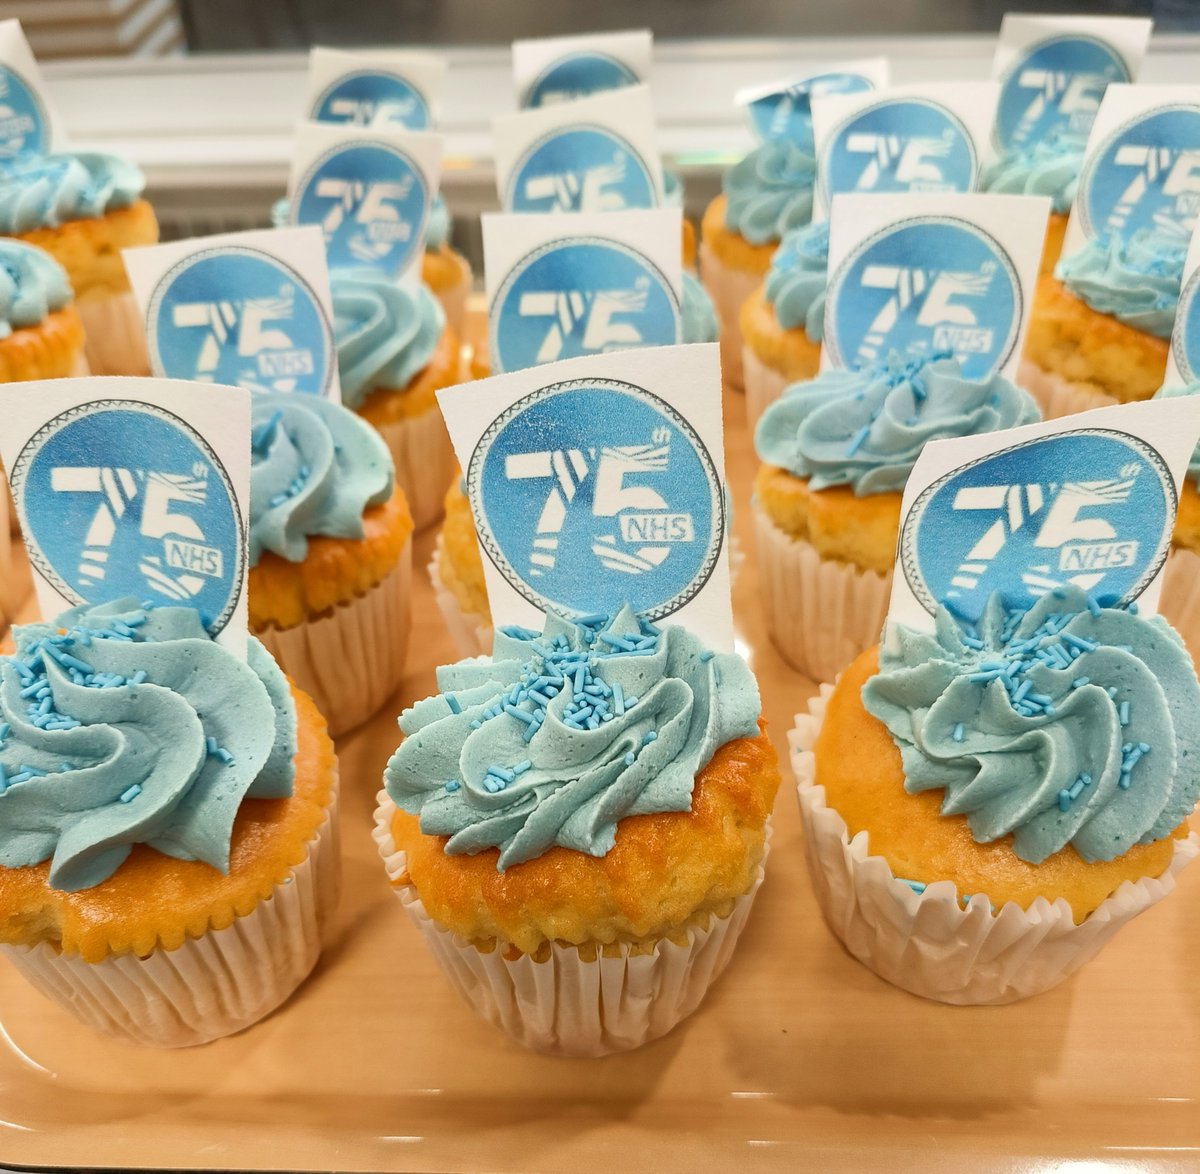 #NHSBirthday cupcakes available in TLC restaurant for £1 each with 25p per cake going to @RDEcharity. Thank you to Ian our star baker for stepping in and doing such a wonderful job in making so many at short notice😀 #NHS75